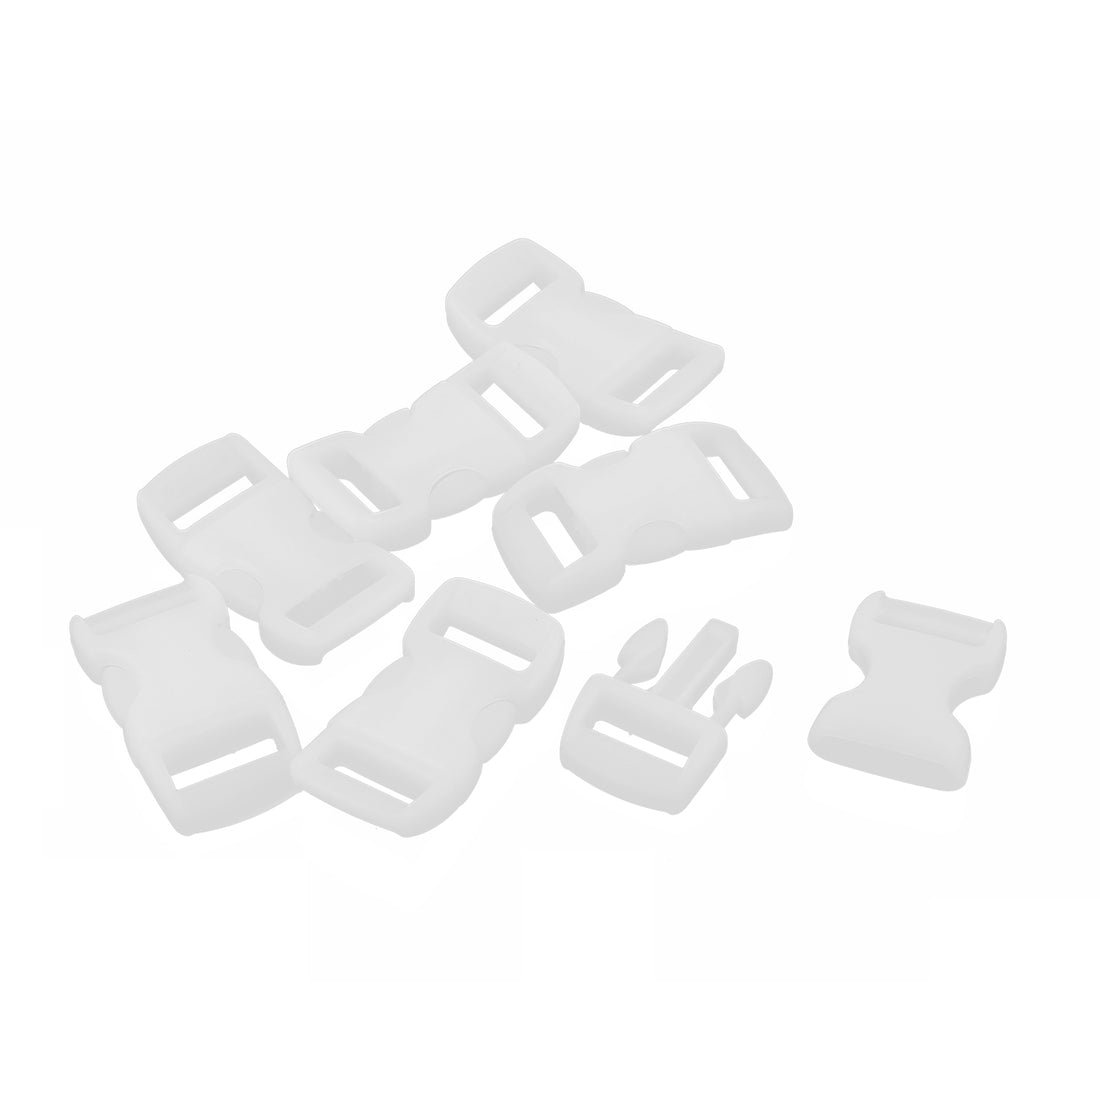 uxcell Uxcell 7 Pcs 11mm Width White Plastic Backpack Rucksack Quick Release Buckle Clip